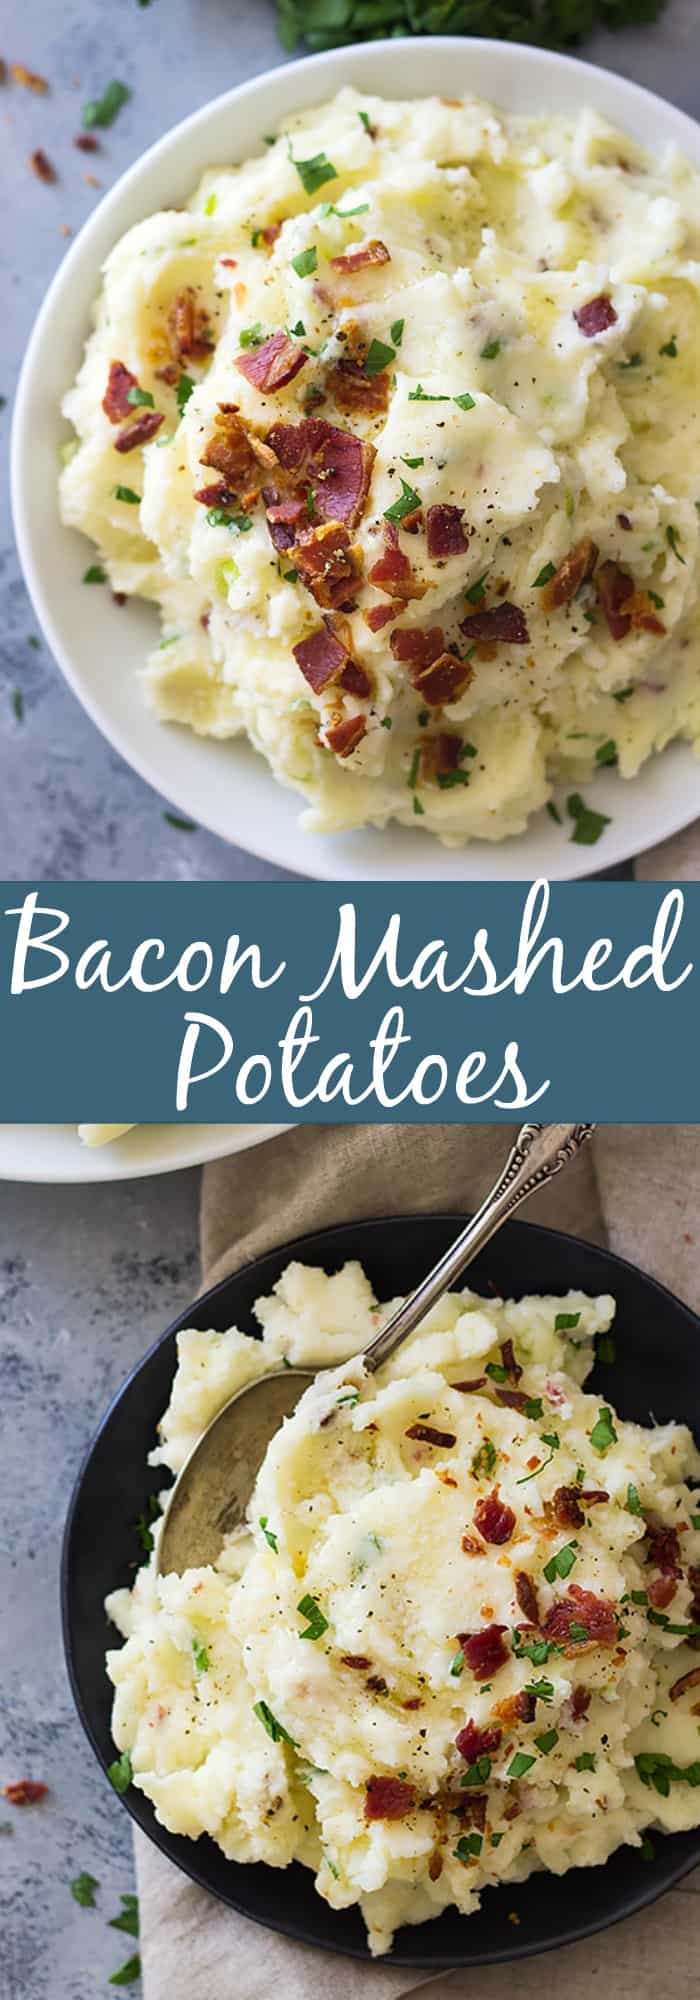 Bacon Mashed Potatoes are creamy, fluffy and full of flavor! Studded with crispy bacon, green onions and made ultra decadent with a little cream cheese. | www.countrysidecravings.com